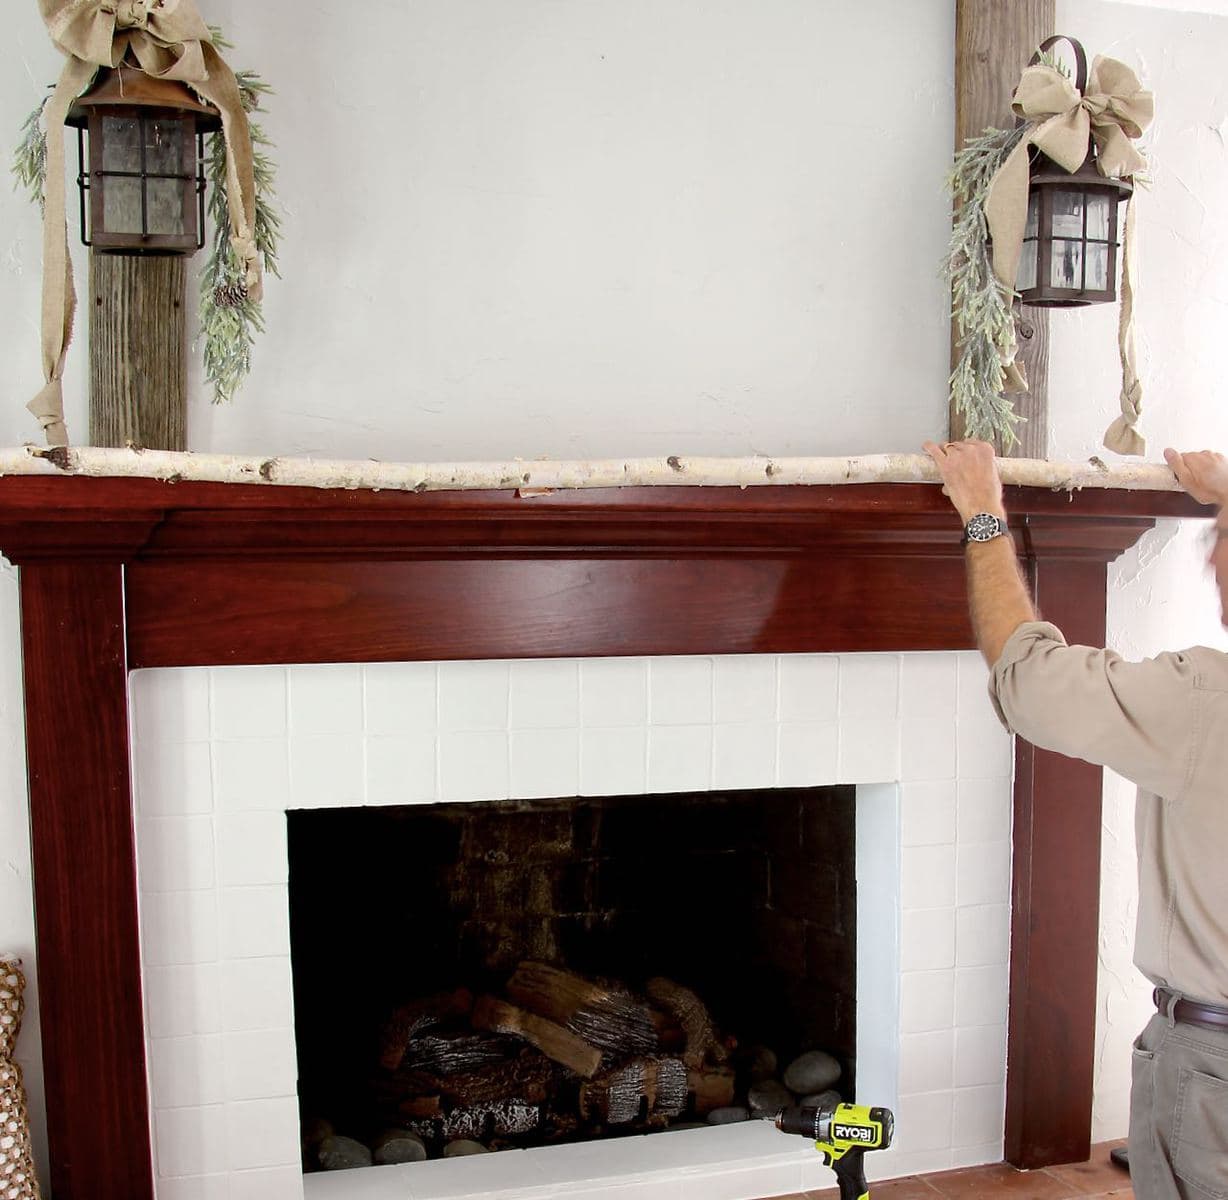 Image of a man hold the birch branch along the mantel